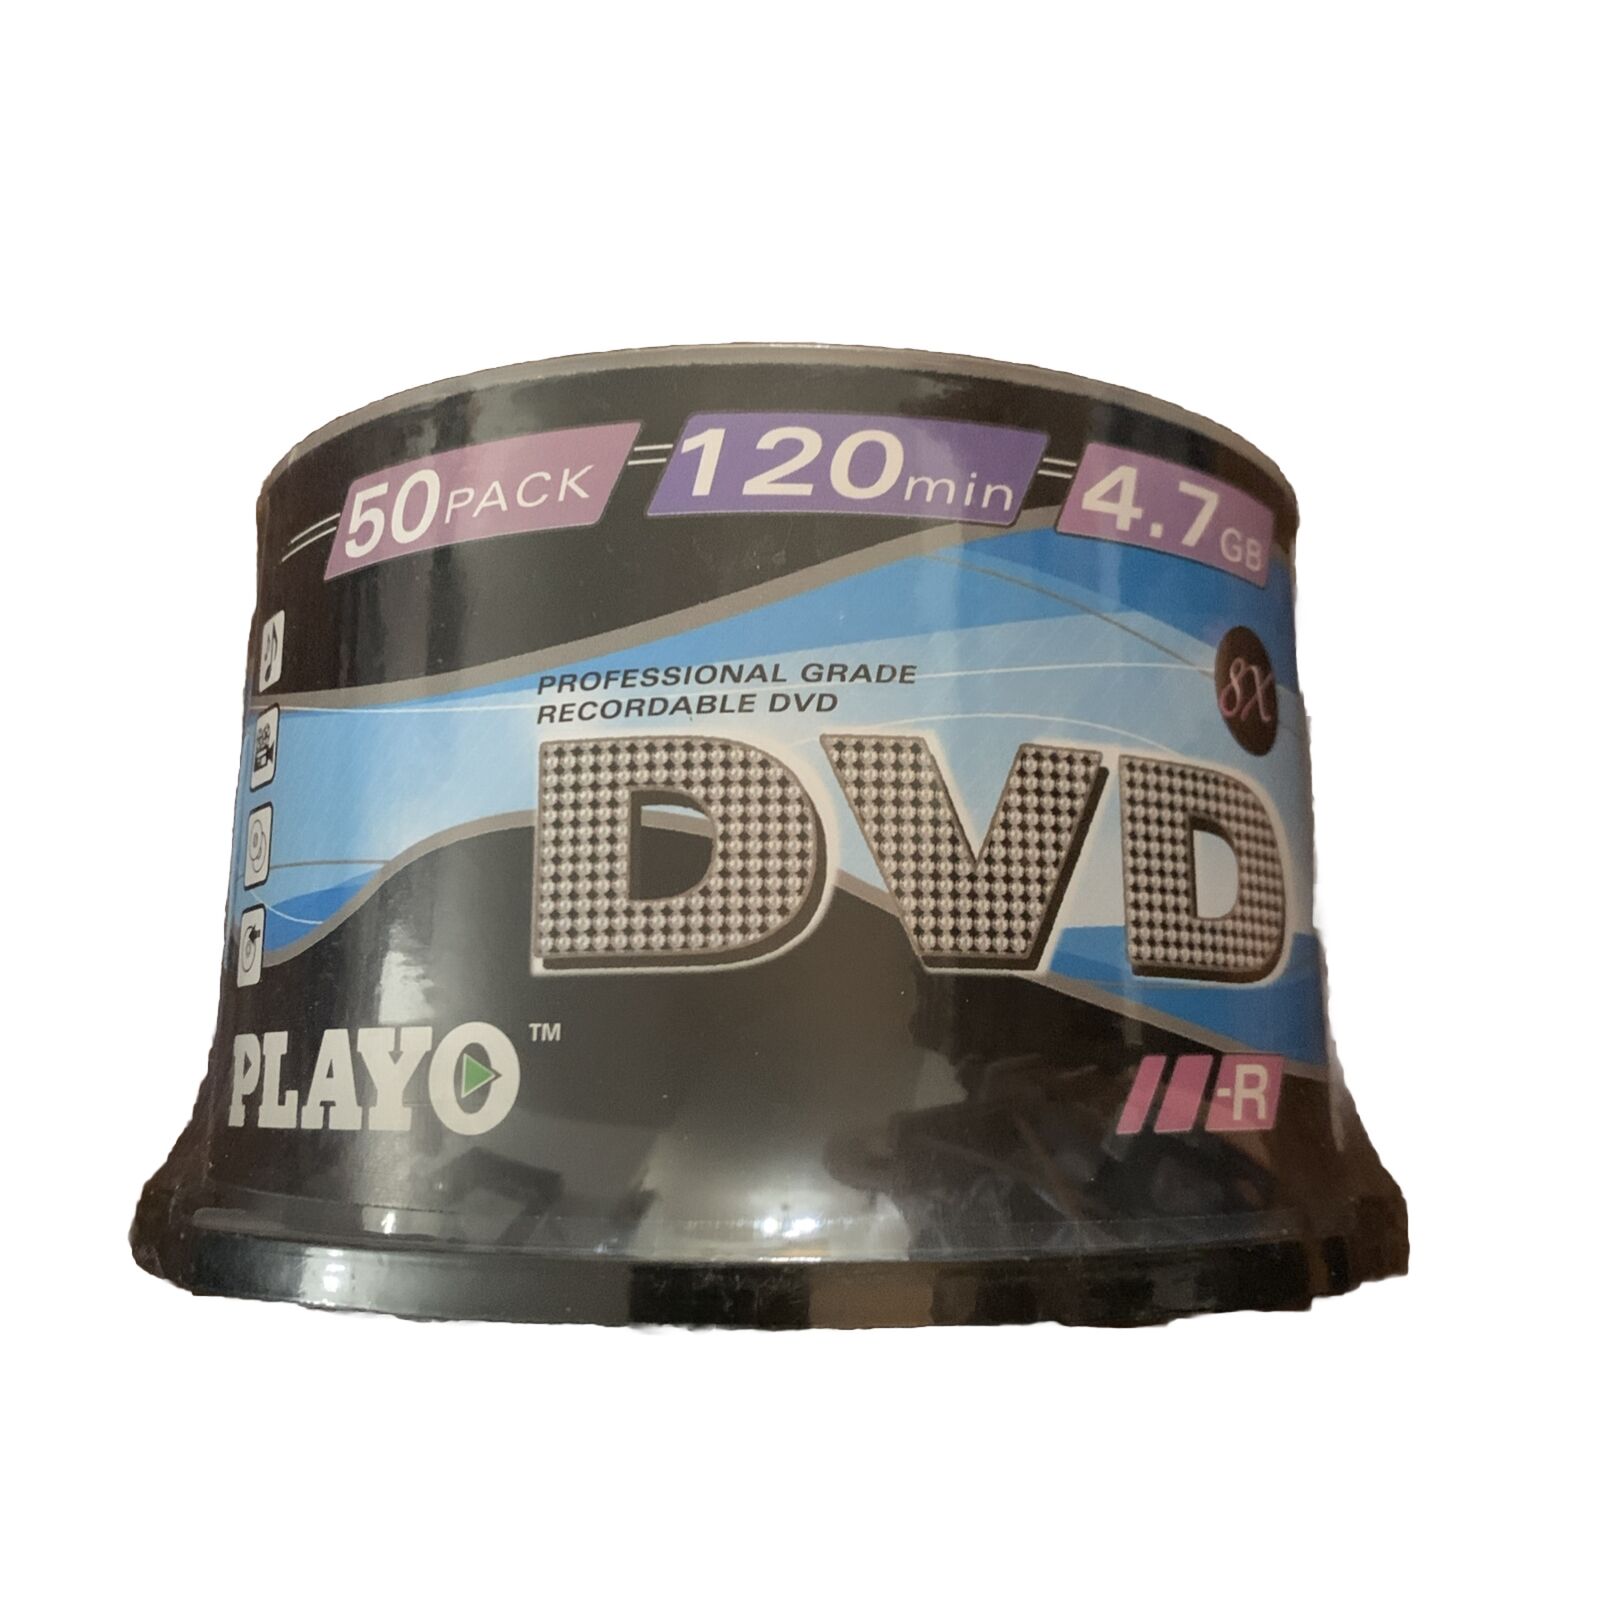 Playo DVD-R 50 Pack 120 Min 4.7GB Printable Blank Disks Spindle Factory Sealed